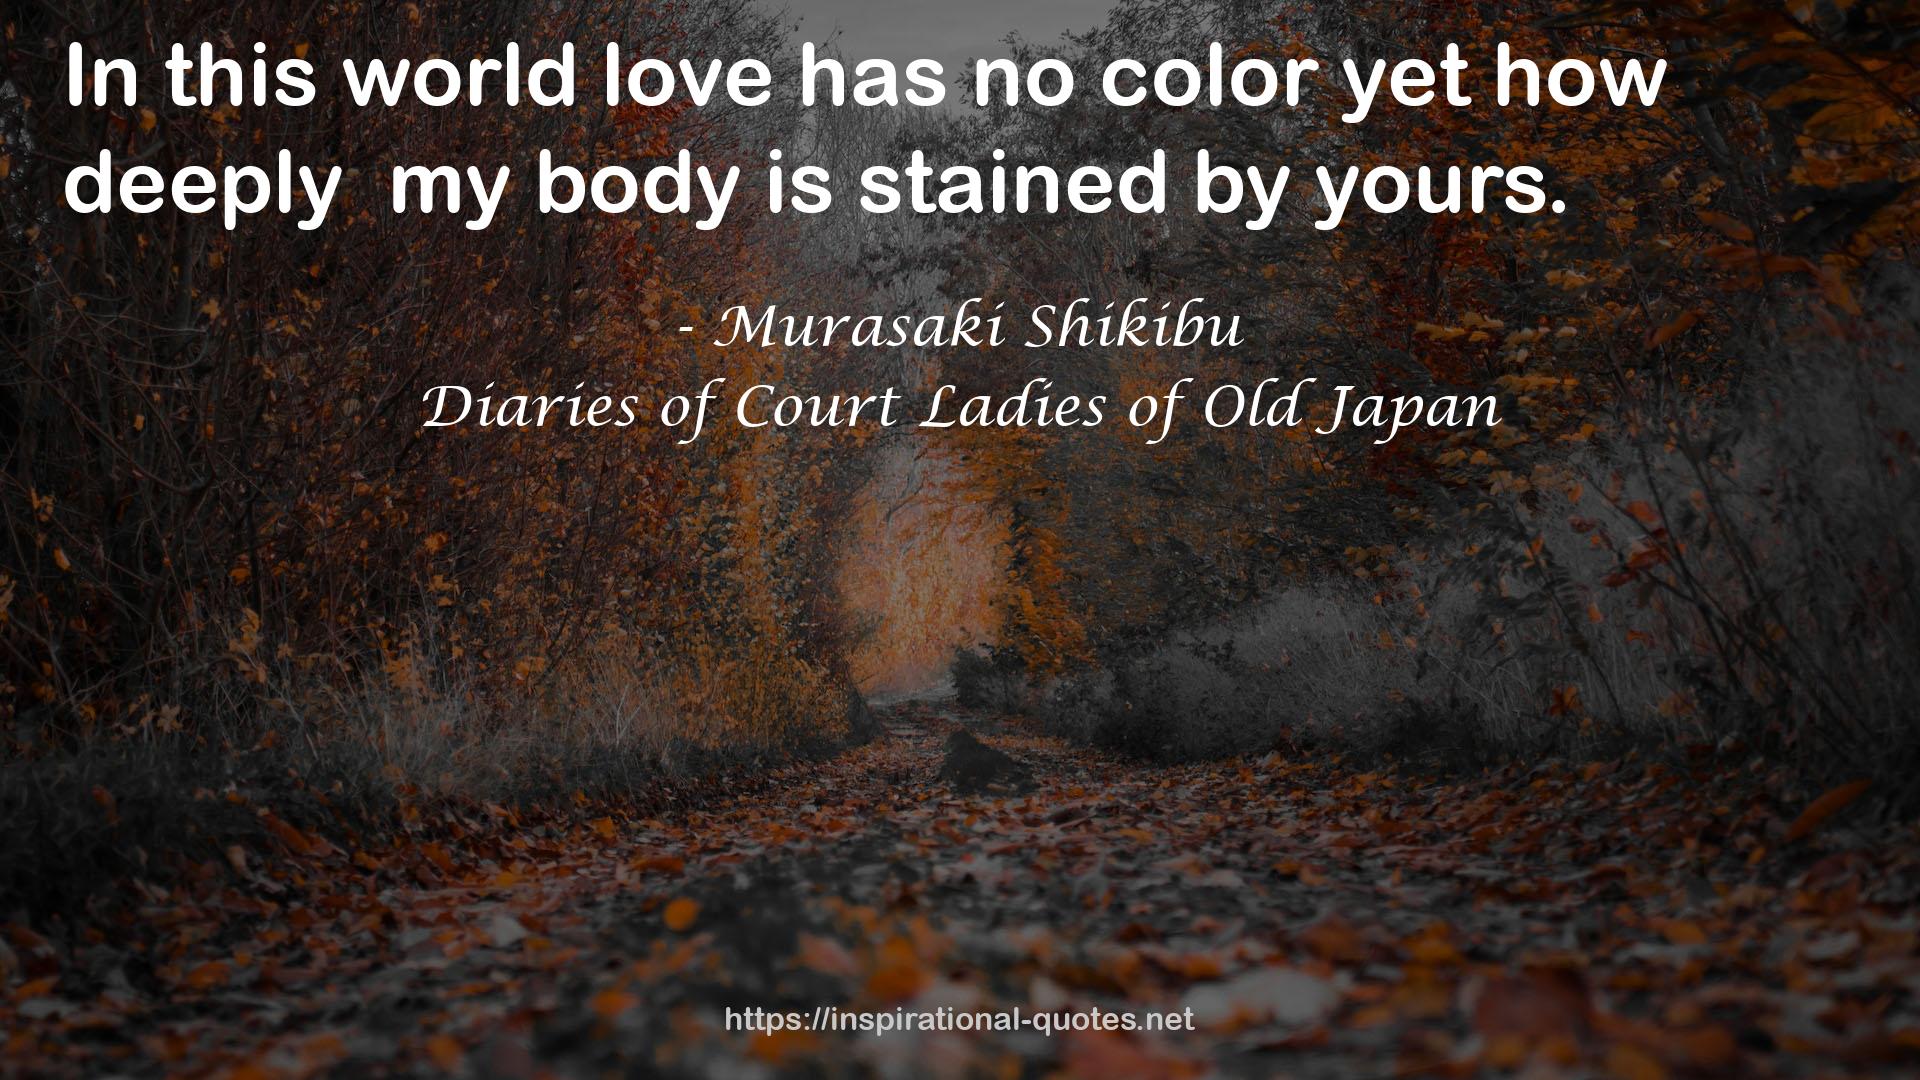 Diaries of Court Ladies of Old Japan QUOTES